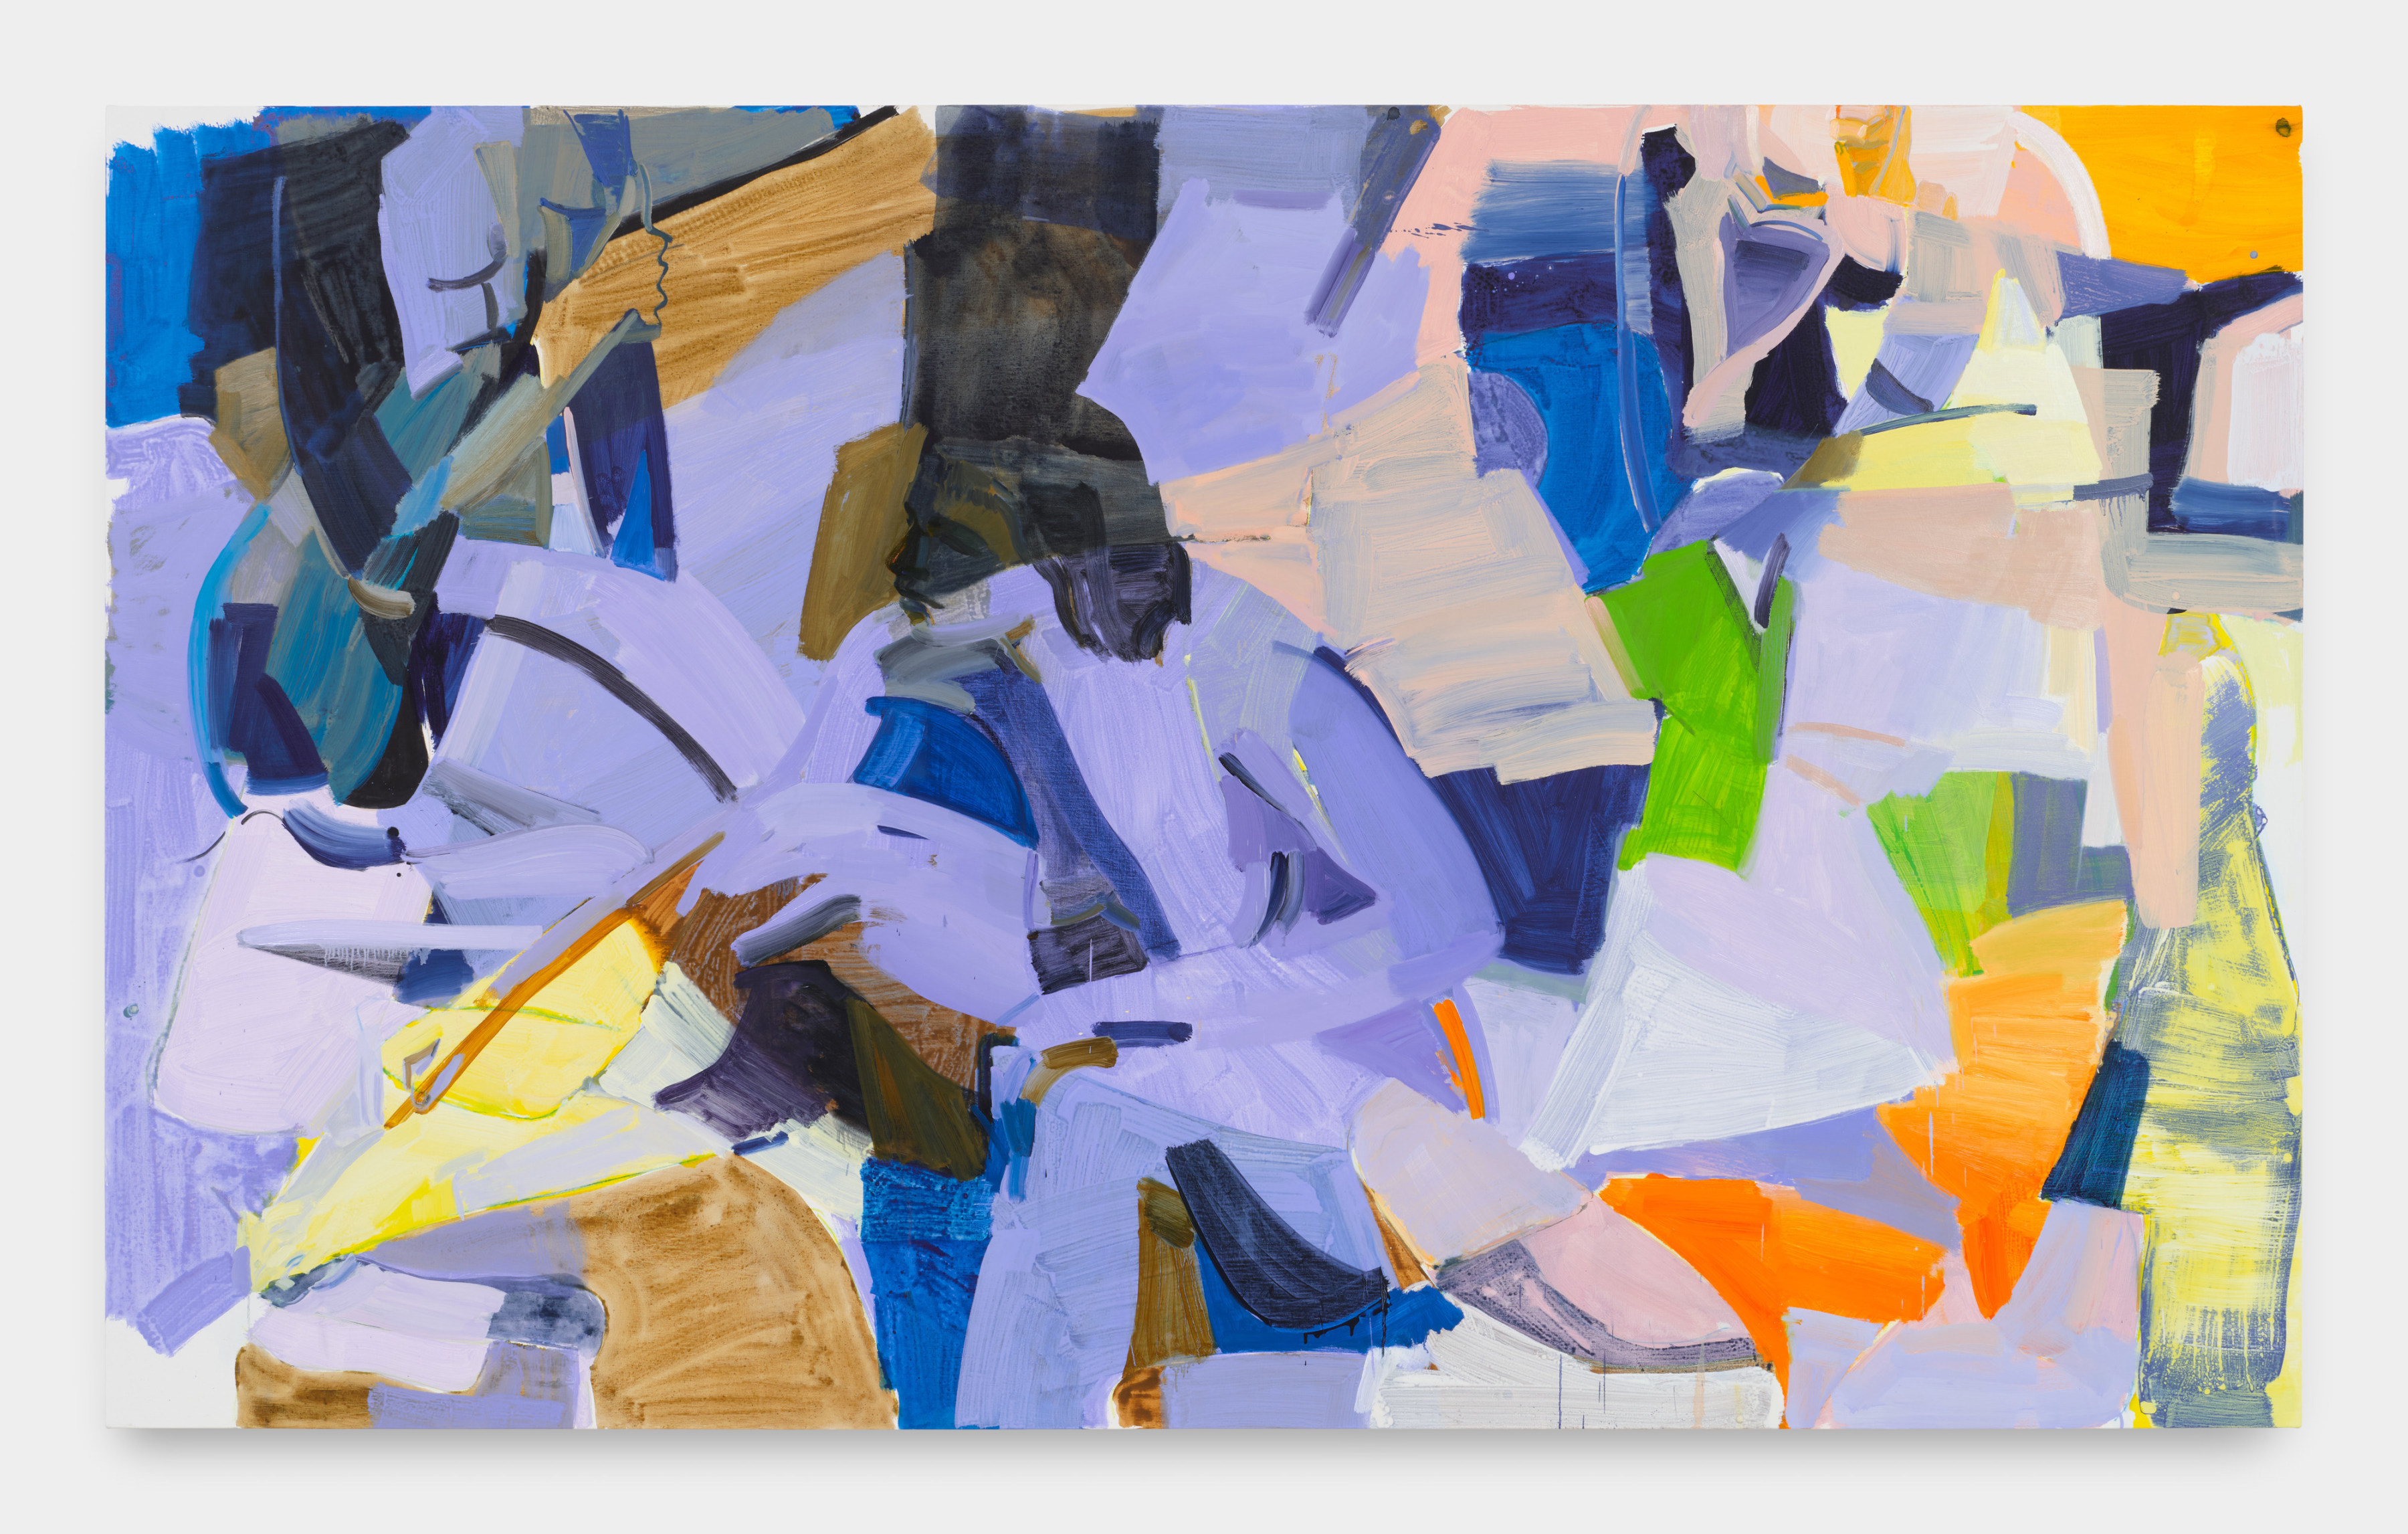 Loosely geometric swatches of lapis, orange, bright greens and blues comprise an abstract space with a seated figure. 